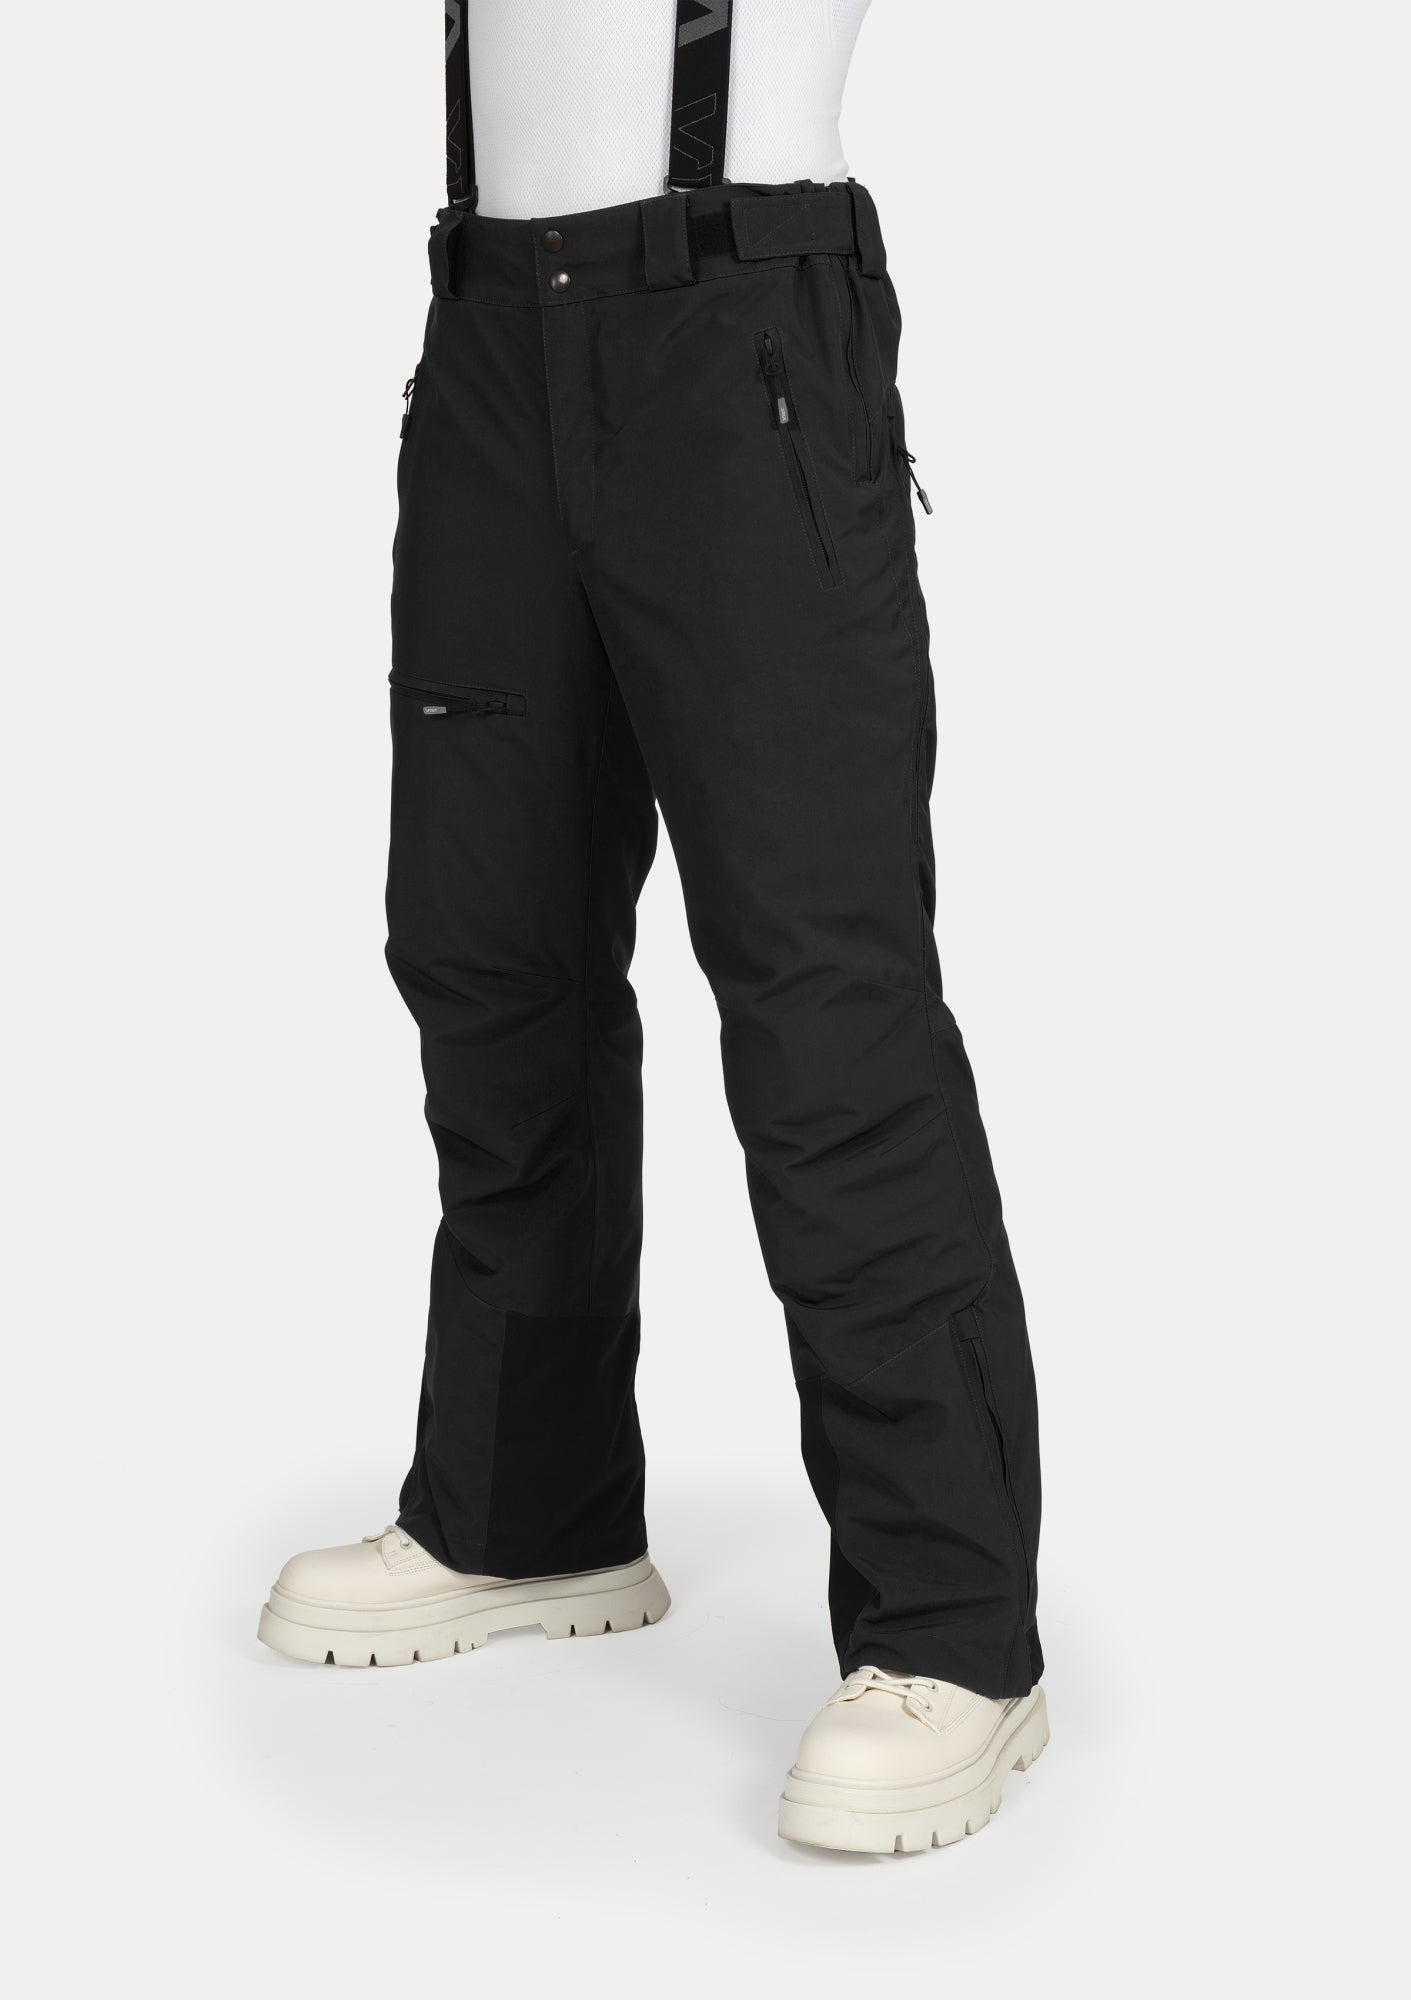 Apex Cross Insulated Pants